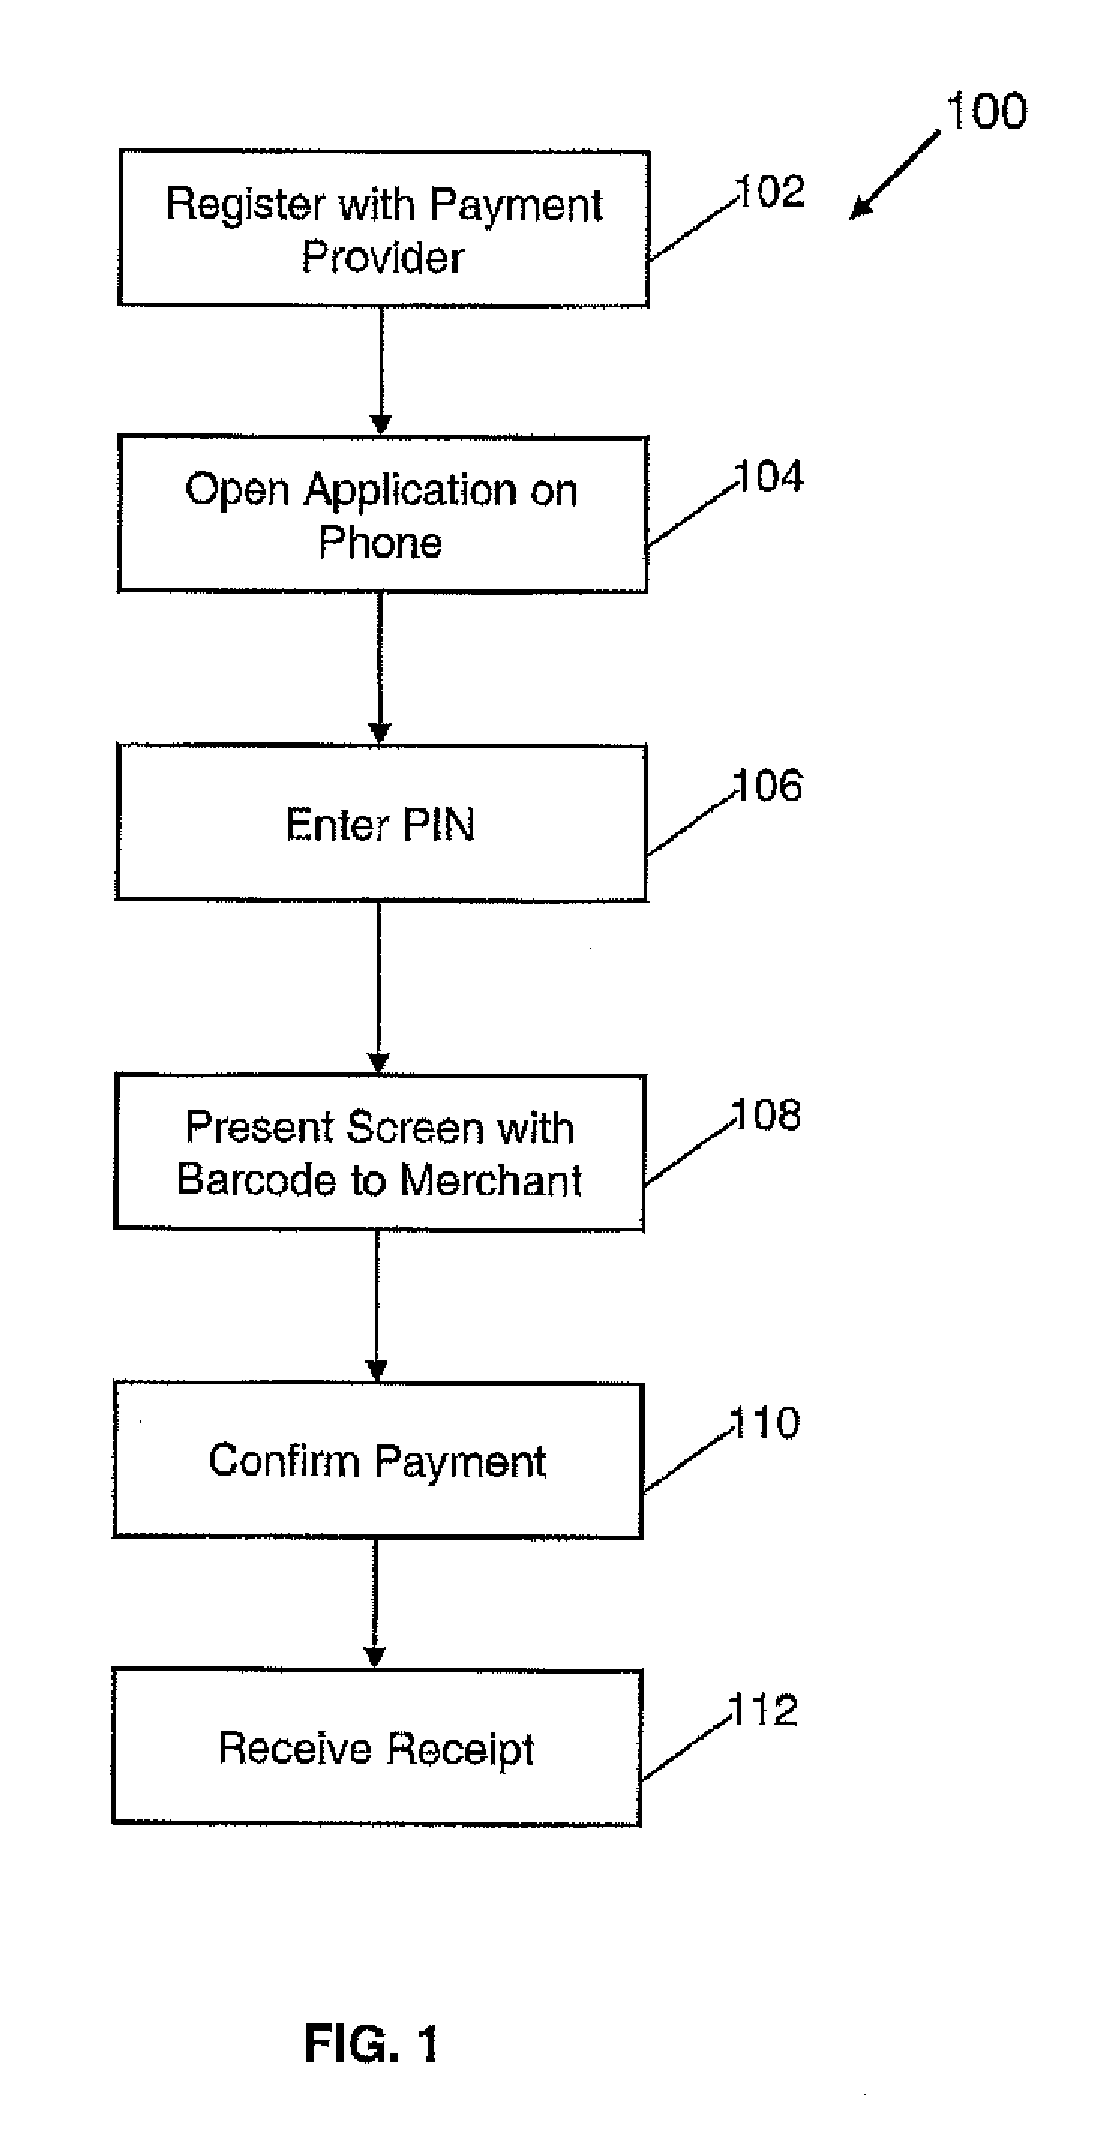 Mobile barcode generation and payment